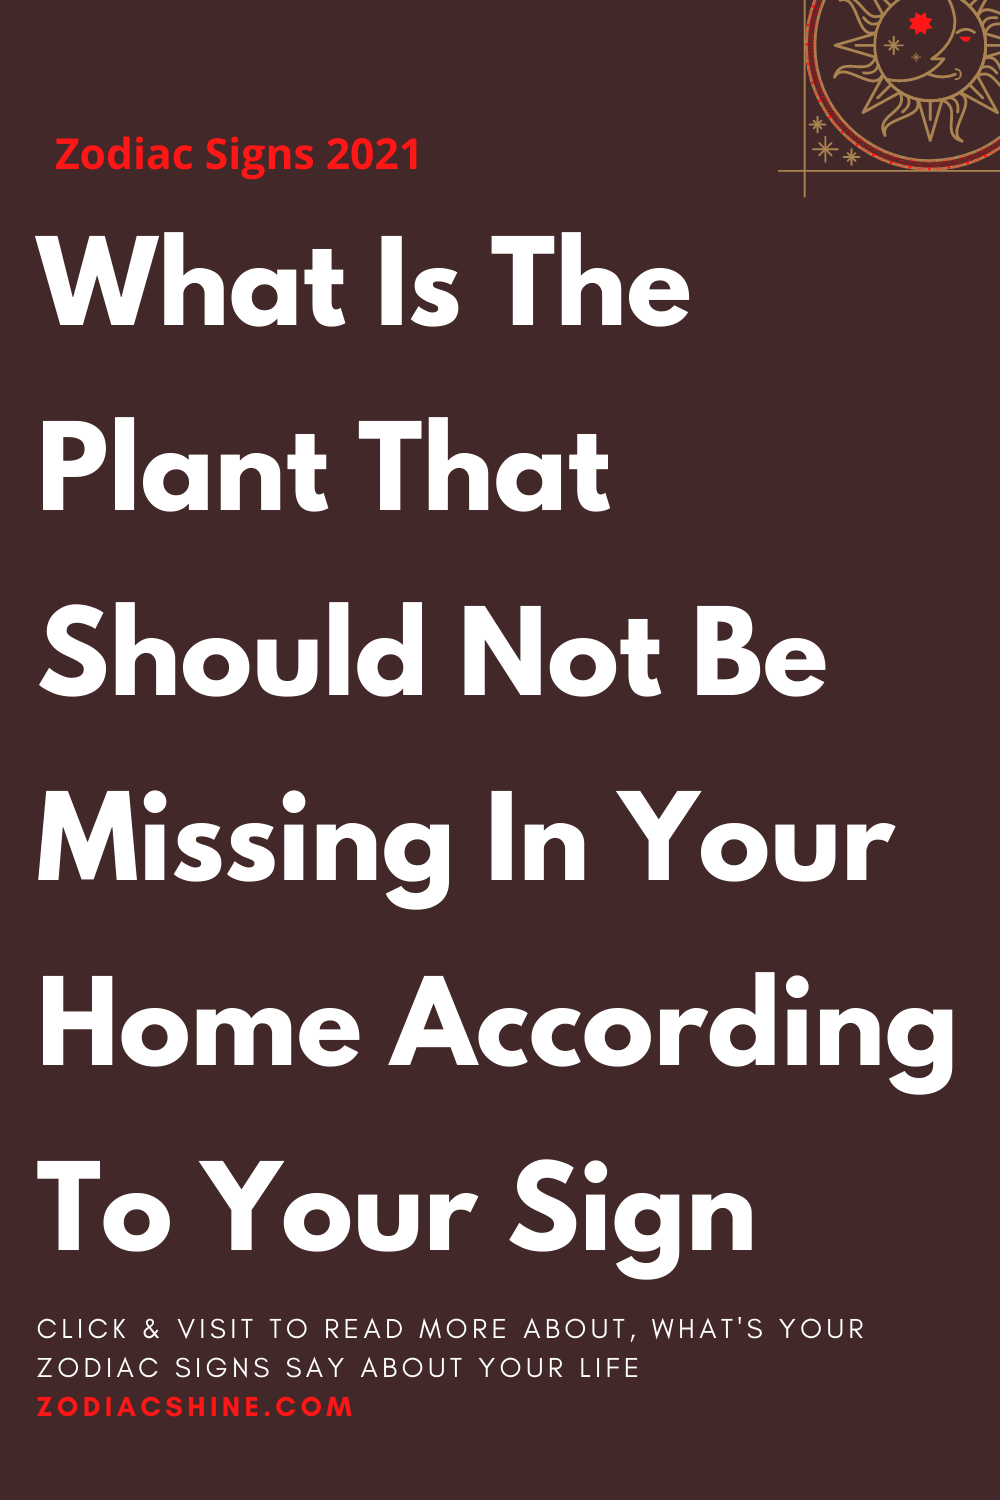 What Is The Plant That Should Not Be Missing In Your Home According To Your Sign